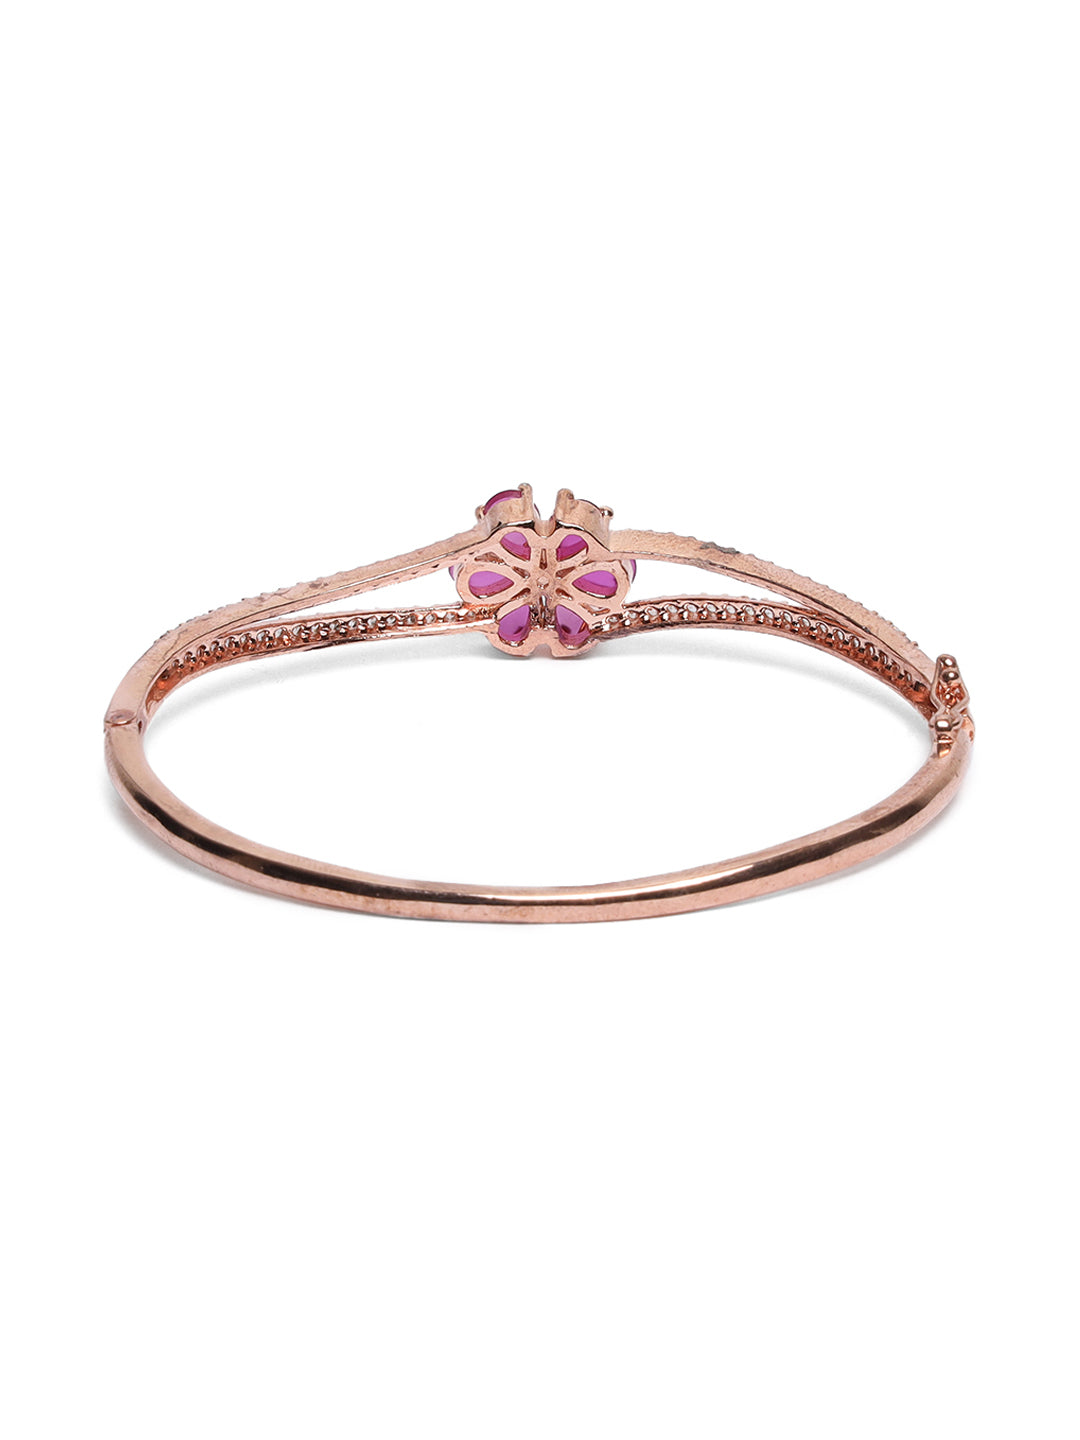 Rose Gold-Plated American Diamond and Ruby Studded Floral Patterned Bracelet - Jazzandsizzle